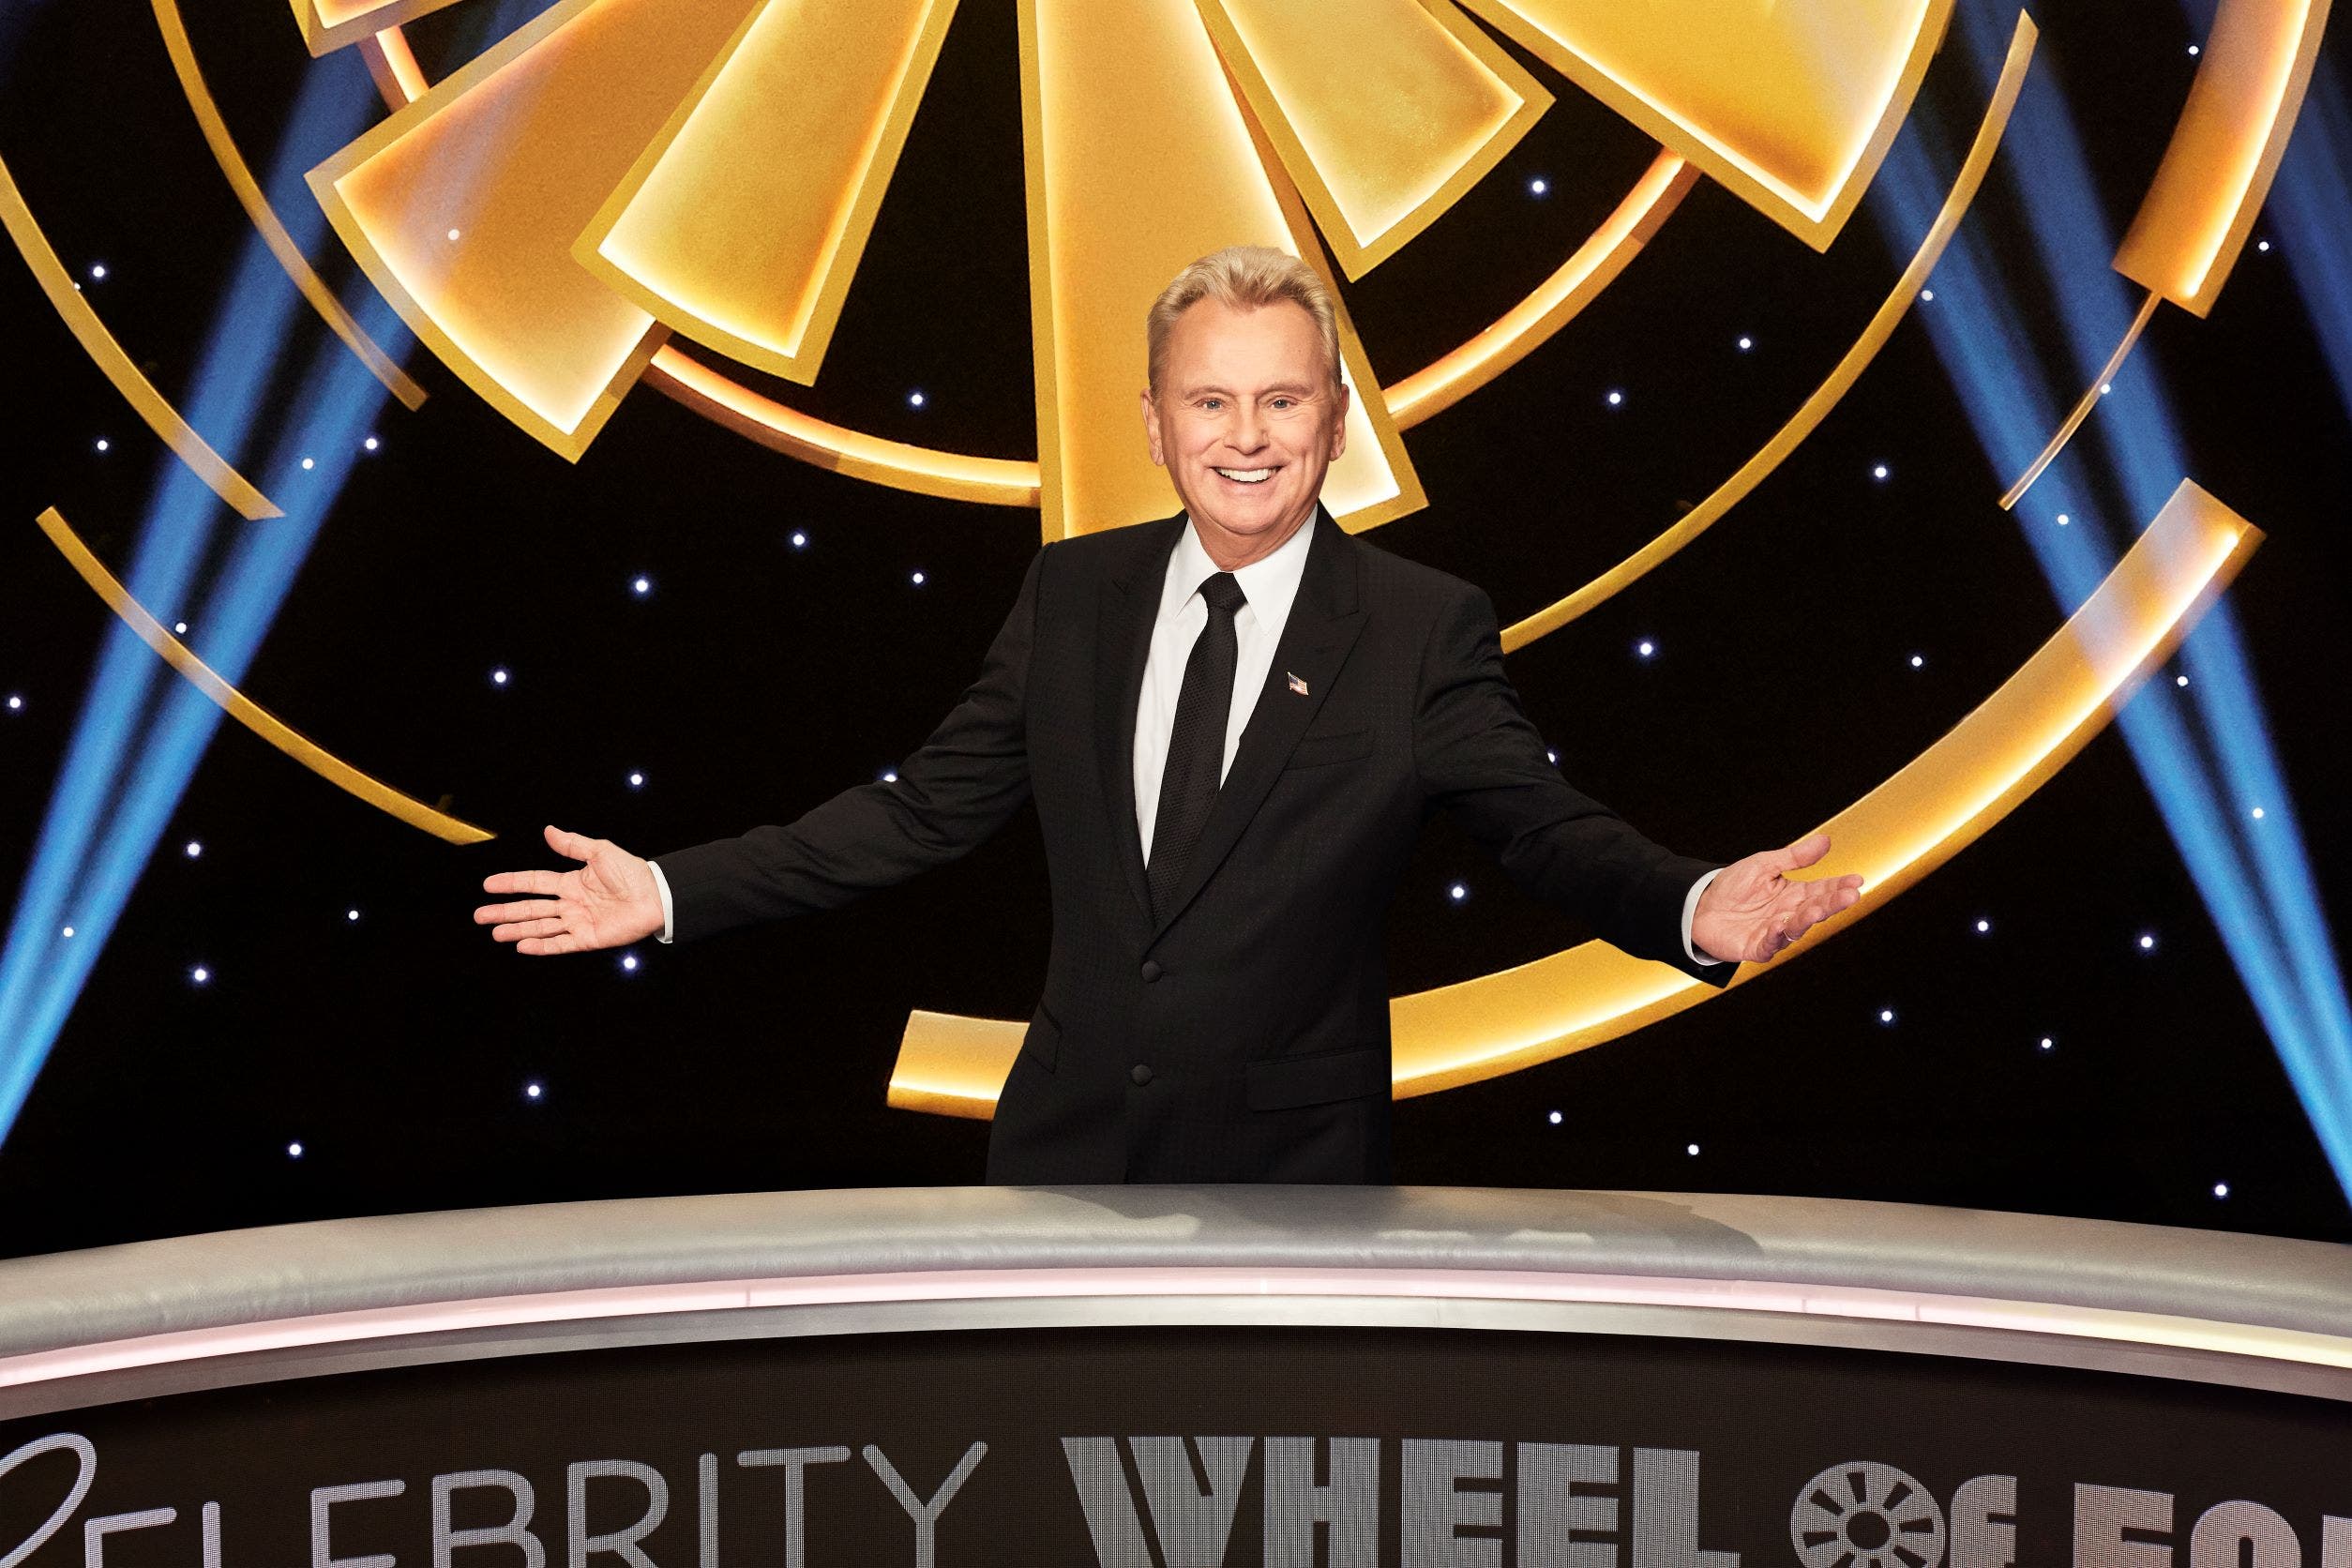 'Wheel of Fortune' host Pat Sajak apologizes to contestant after mocking phobia